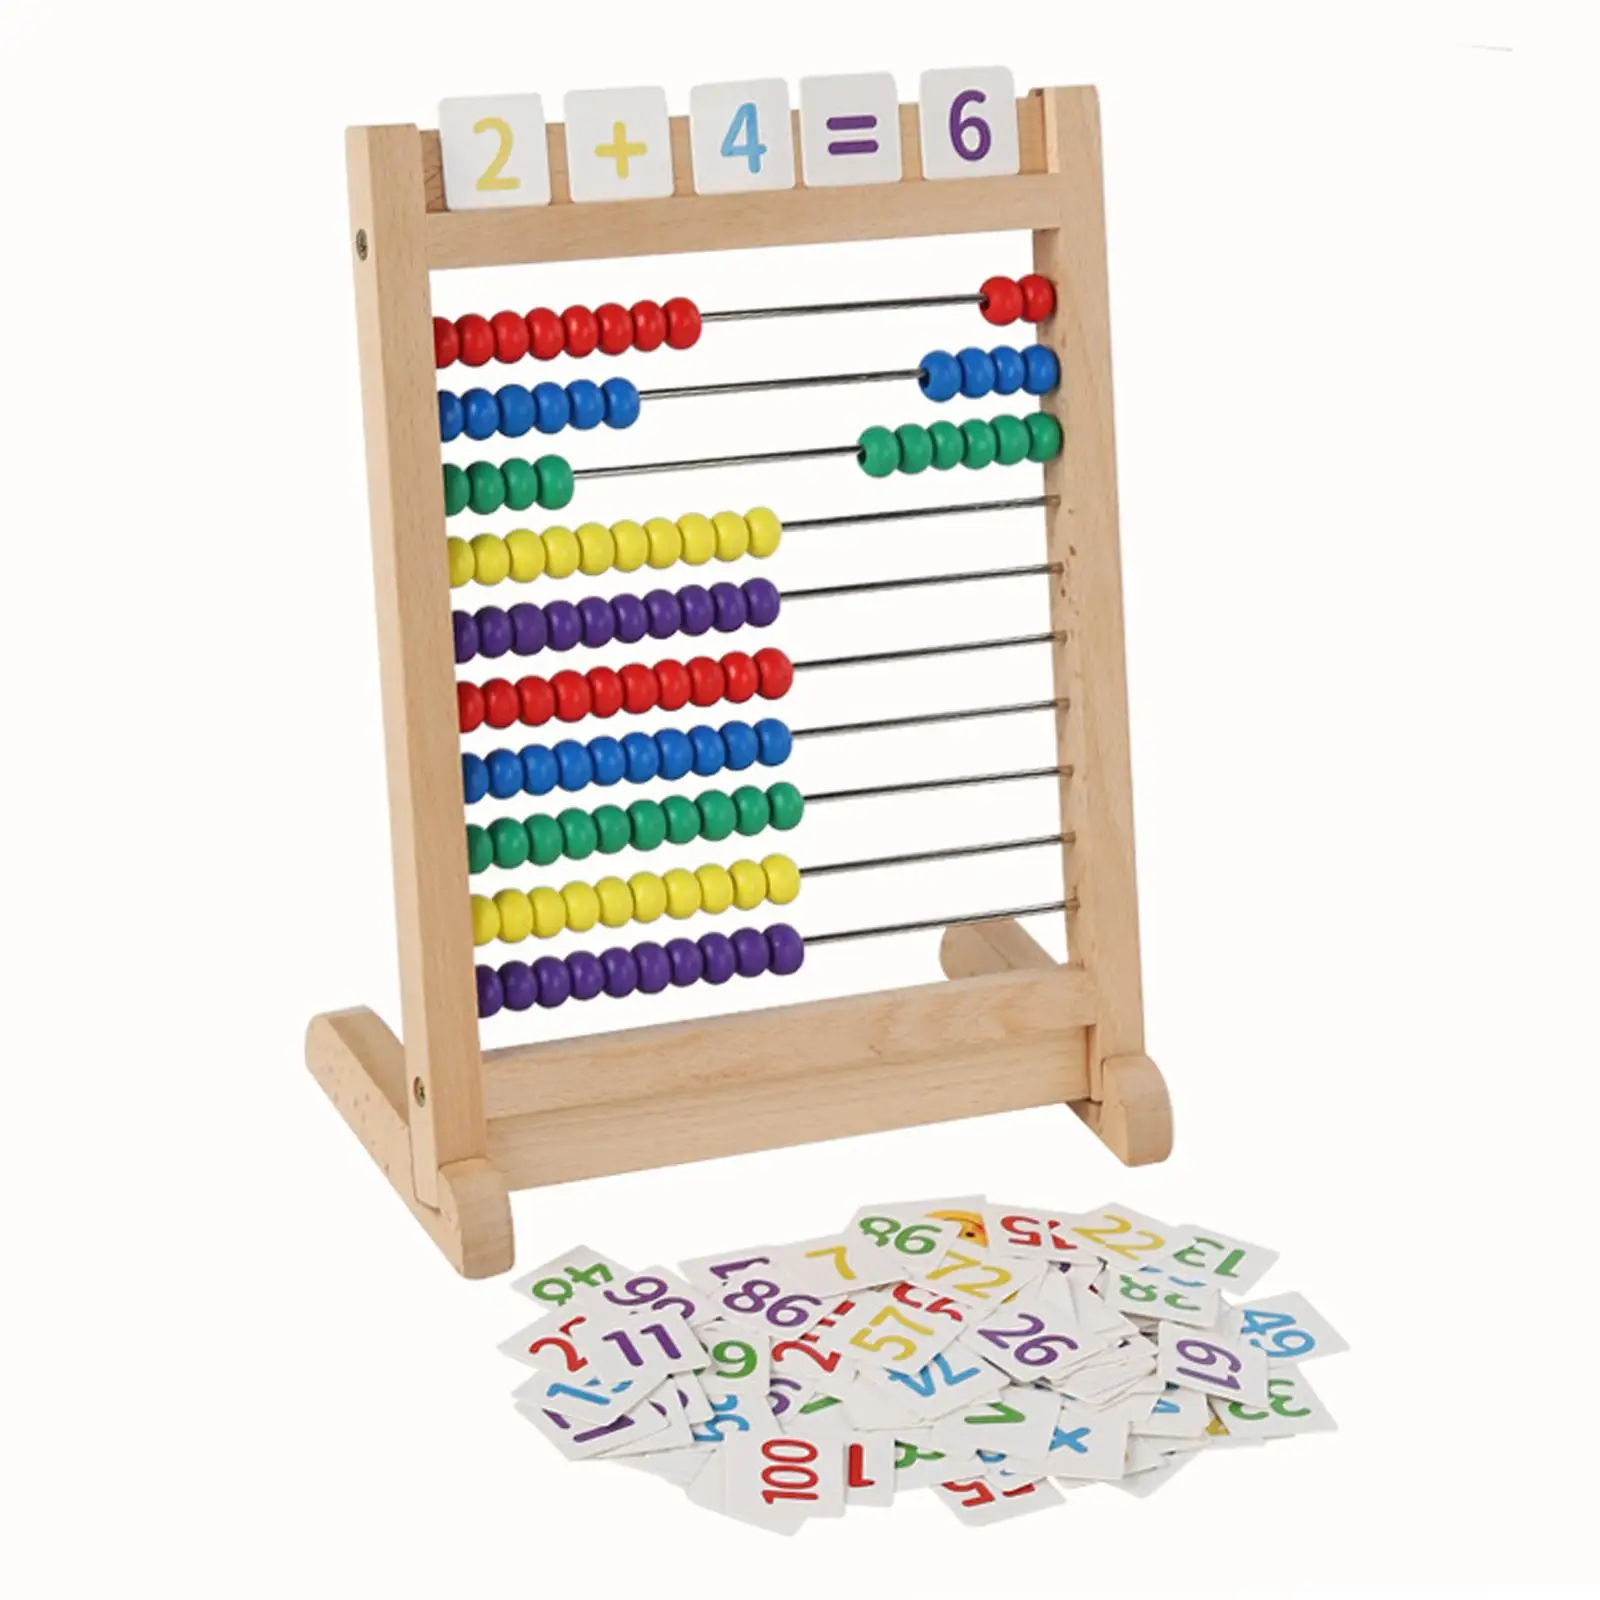 Classic Wooden Abacus Math Games Sturdy Wooden Construction Educational Counting Frames Toy for Elementary Preschool Children